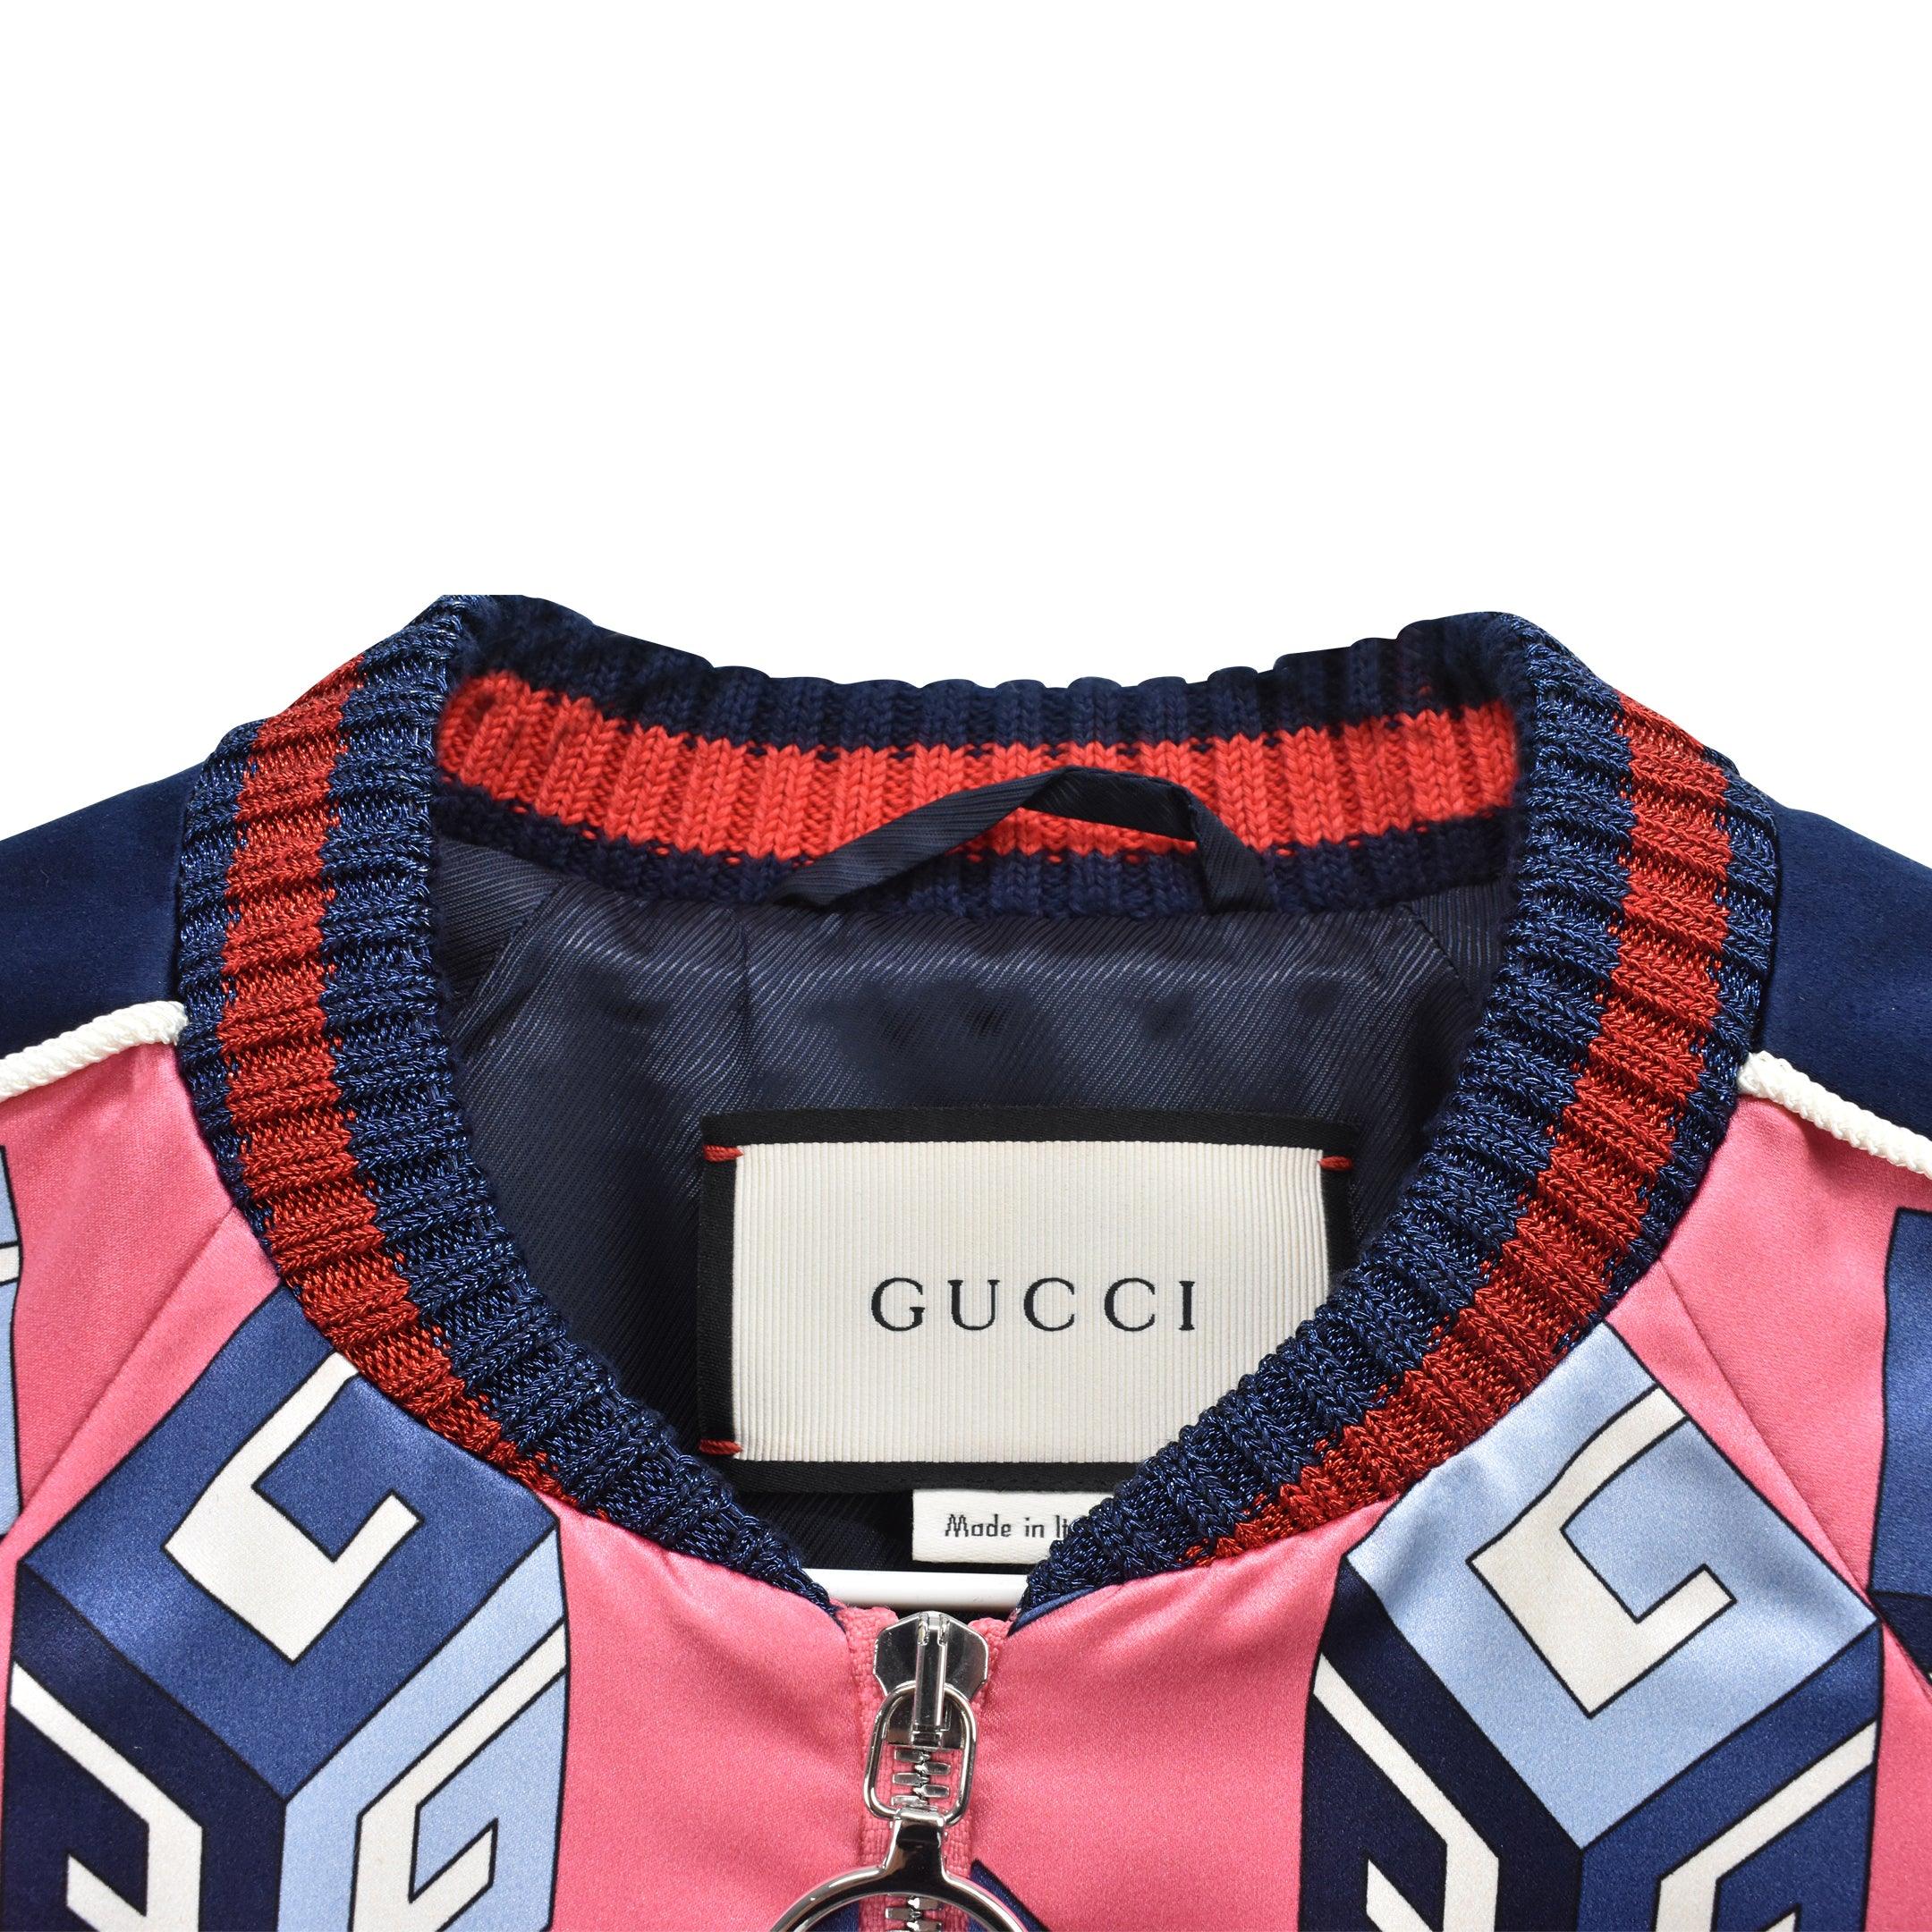 Gucci Bomber Jacket - Women's 38 - Fashionably Yours